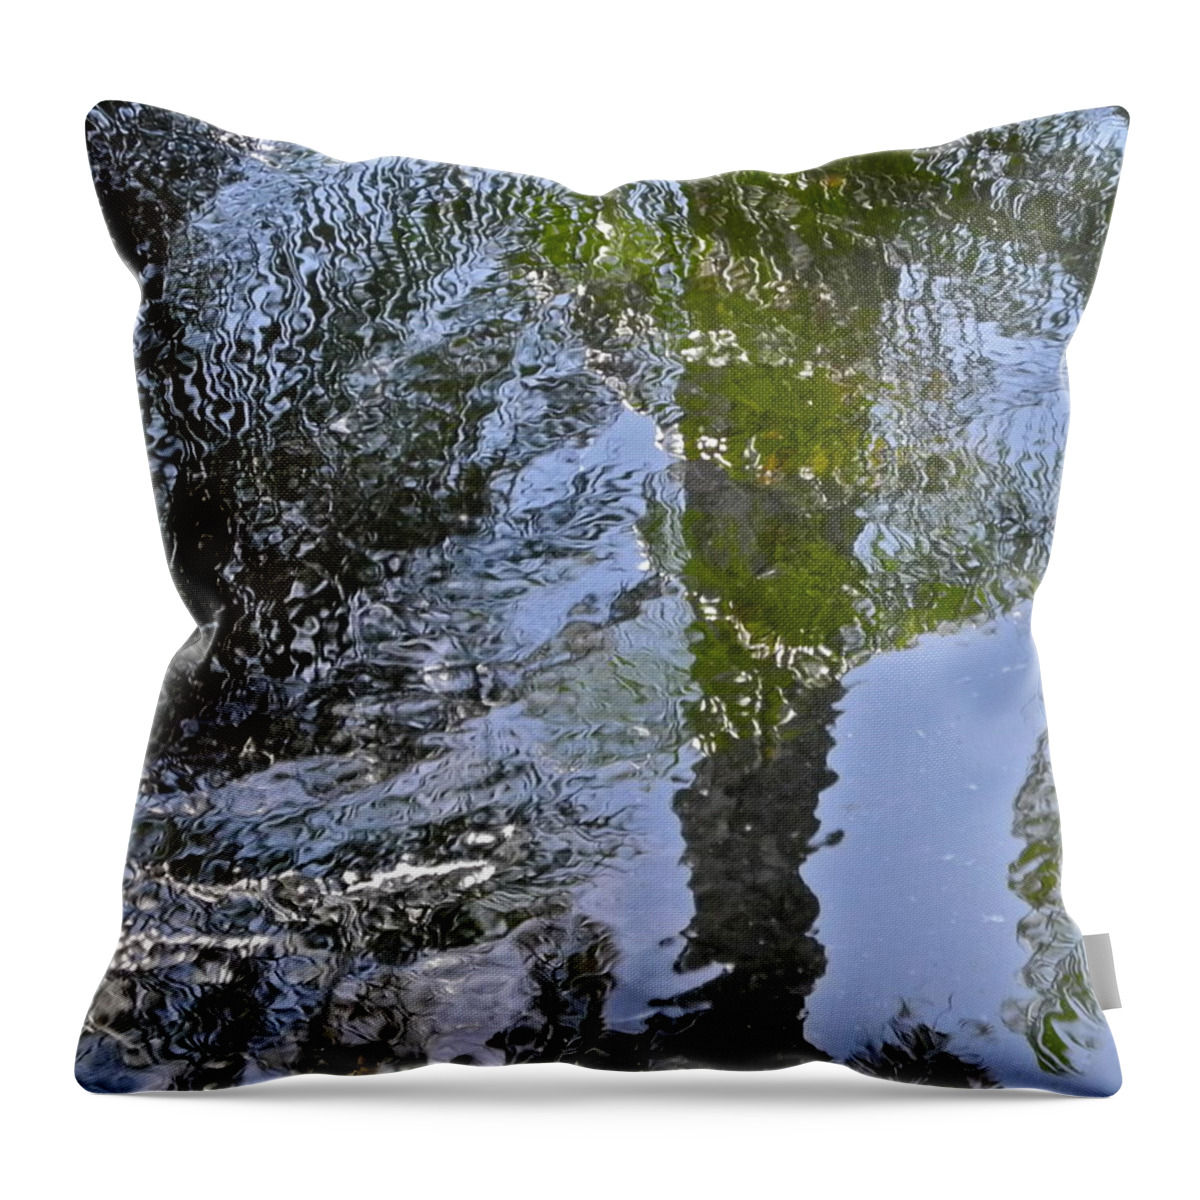 Palms Throw Pillow featuring the photograph Abstract Palm Reflections by Kirsten Giving